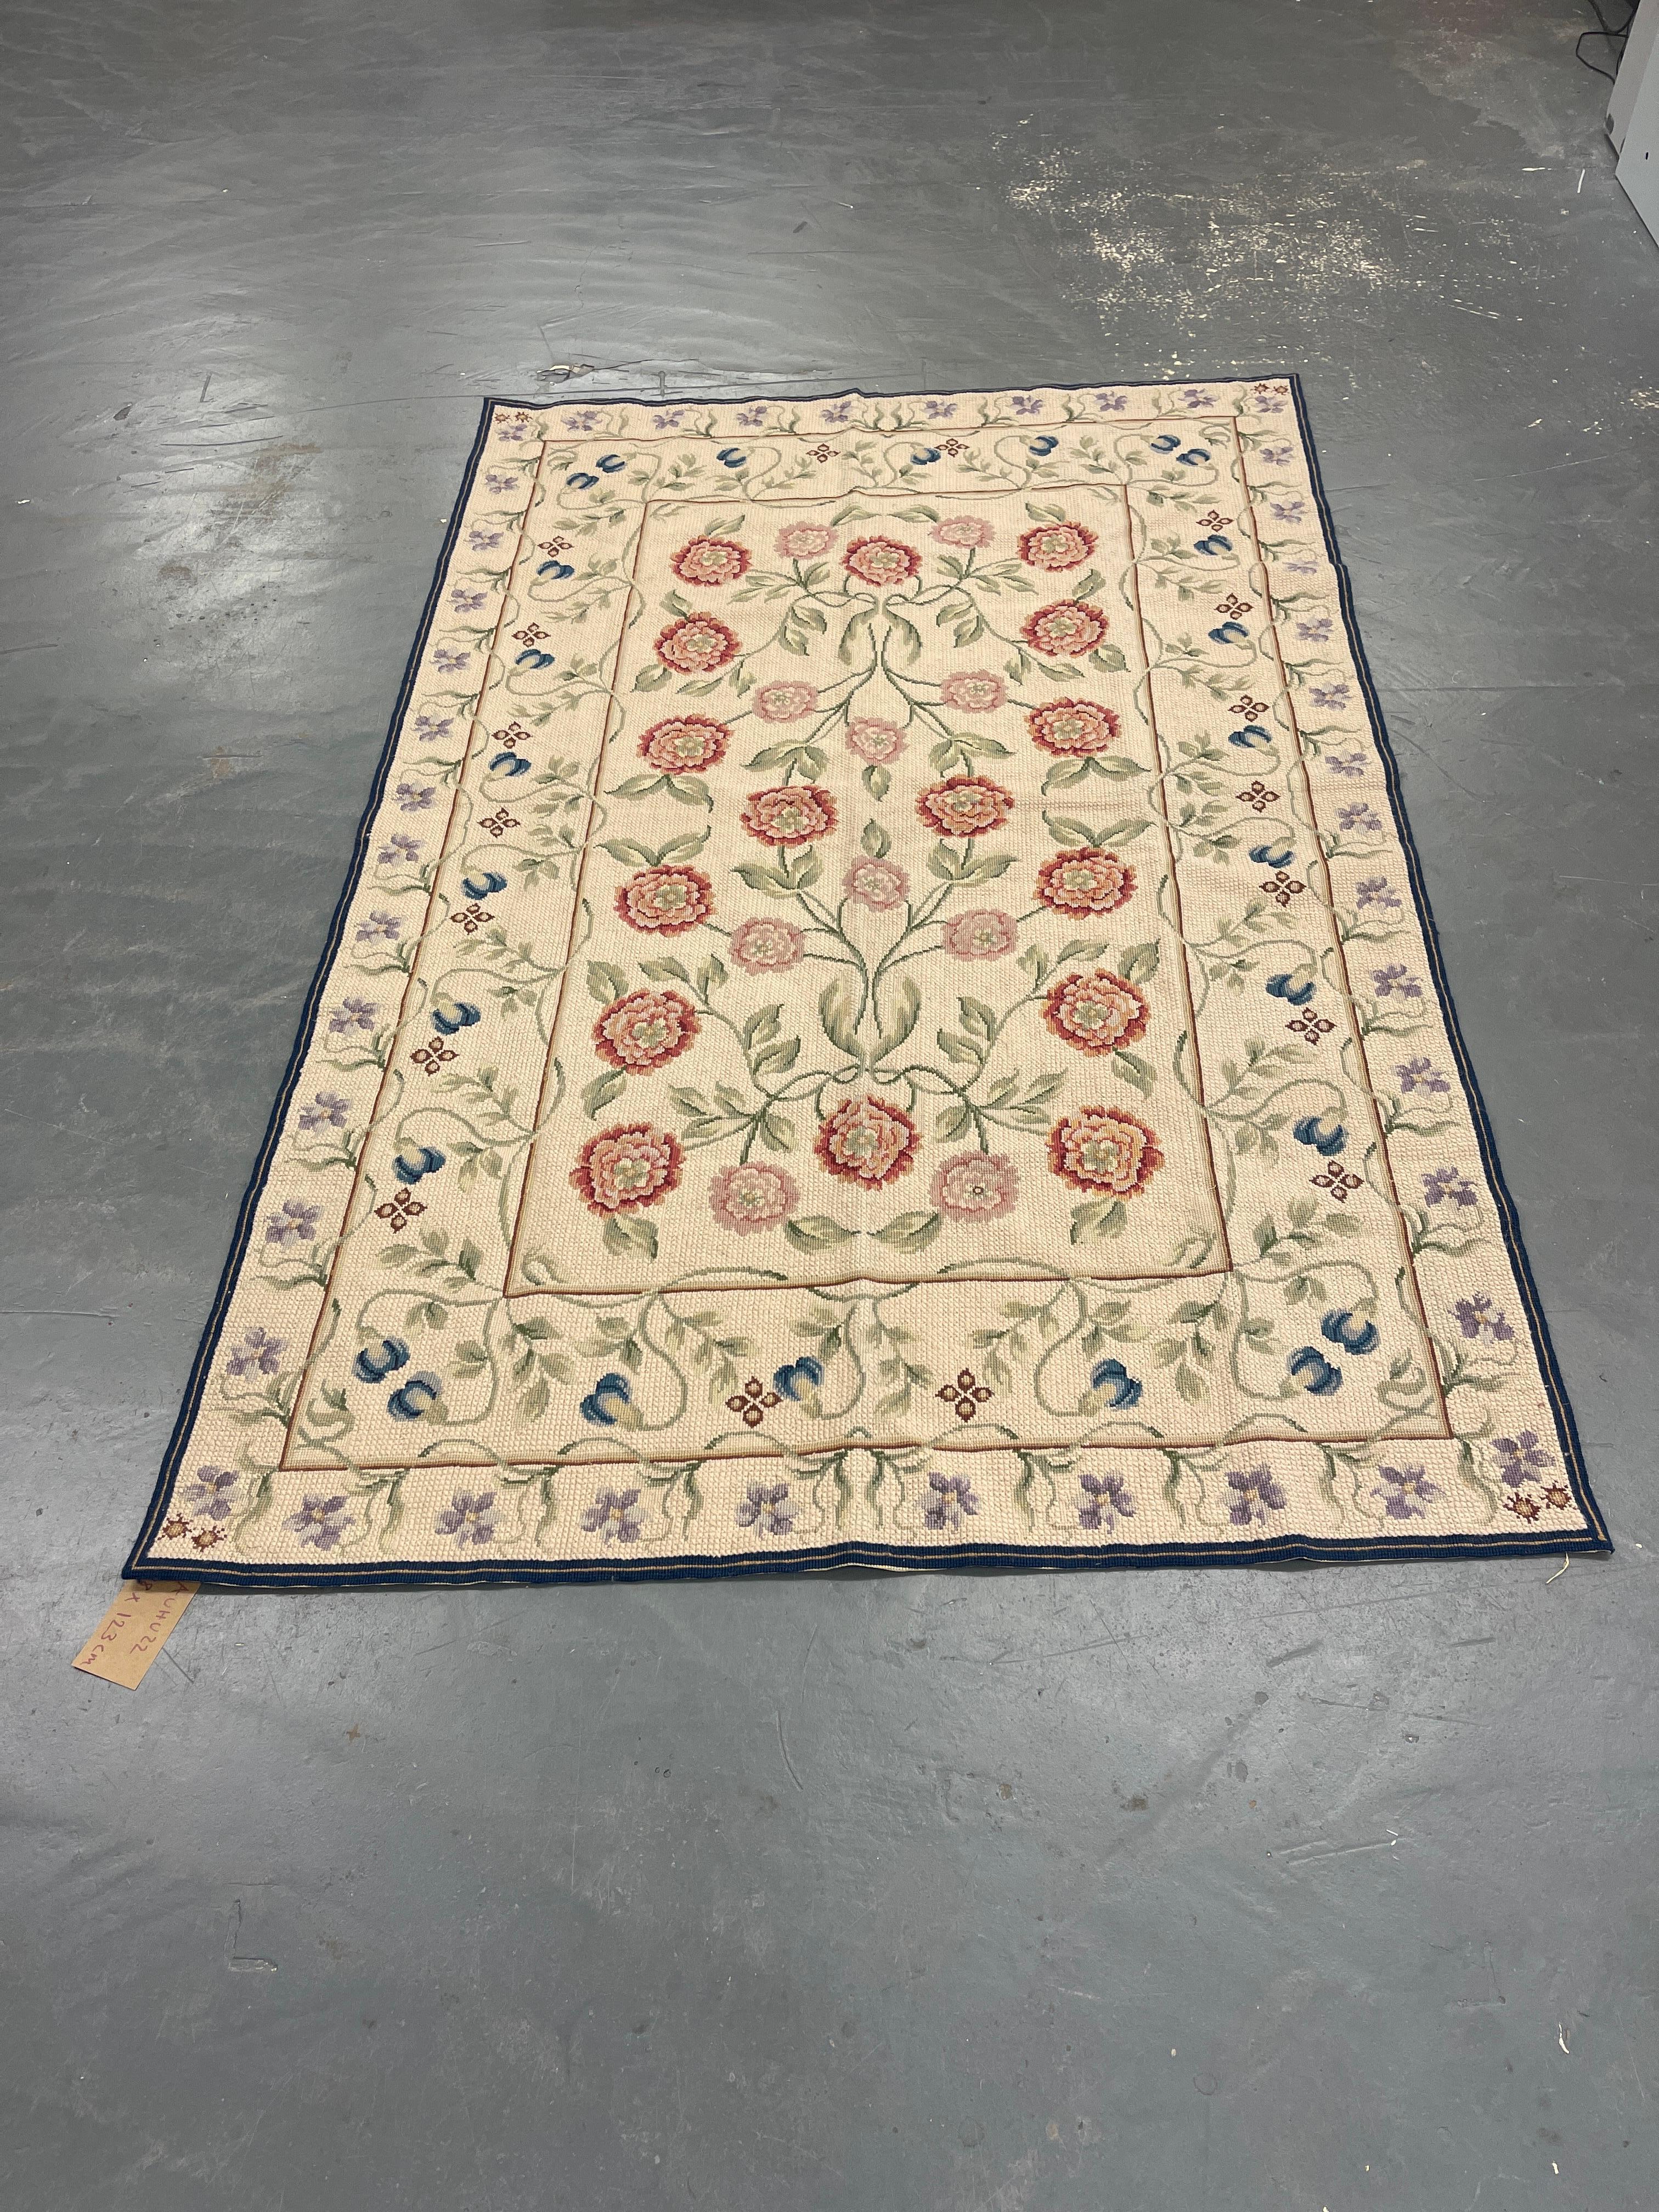 This fantastic area needlepoint rug has been handwoven with a beautiful all-over bunch of floral designs woven on a cream ivory background with cream green and ivory accents. This elegant piece's colour and design make it the perfect accent